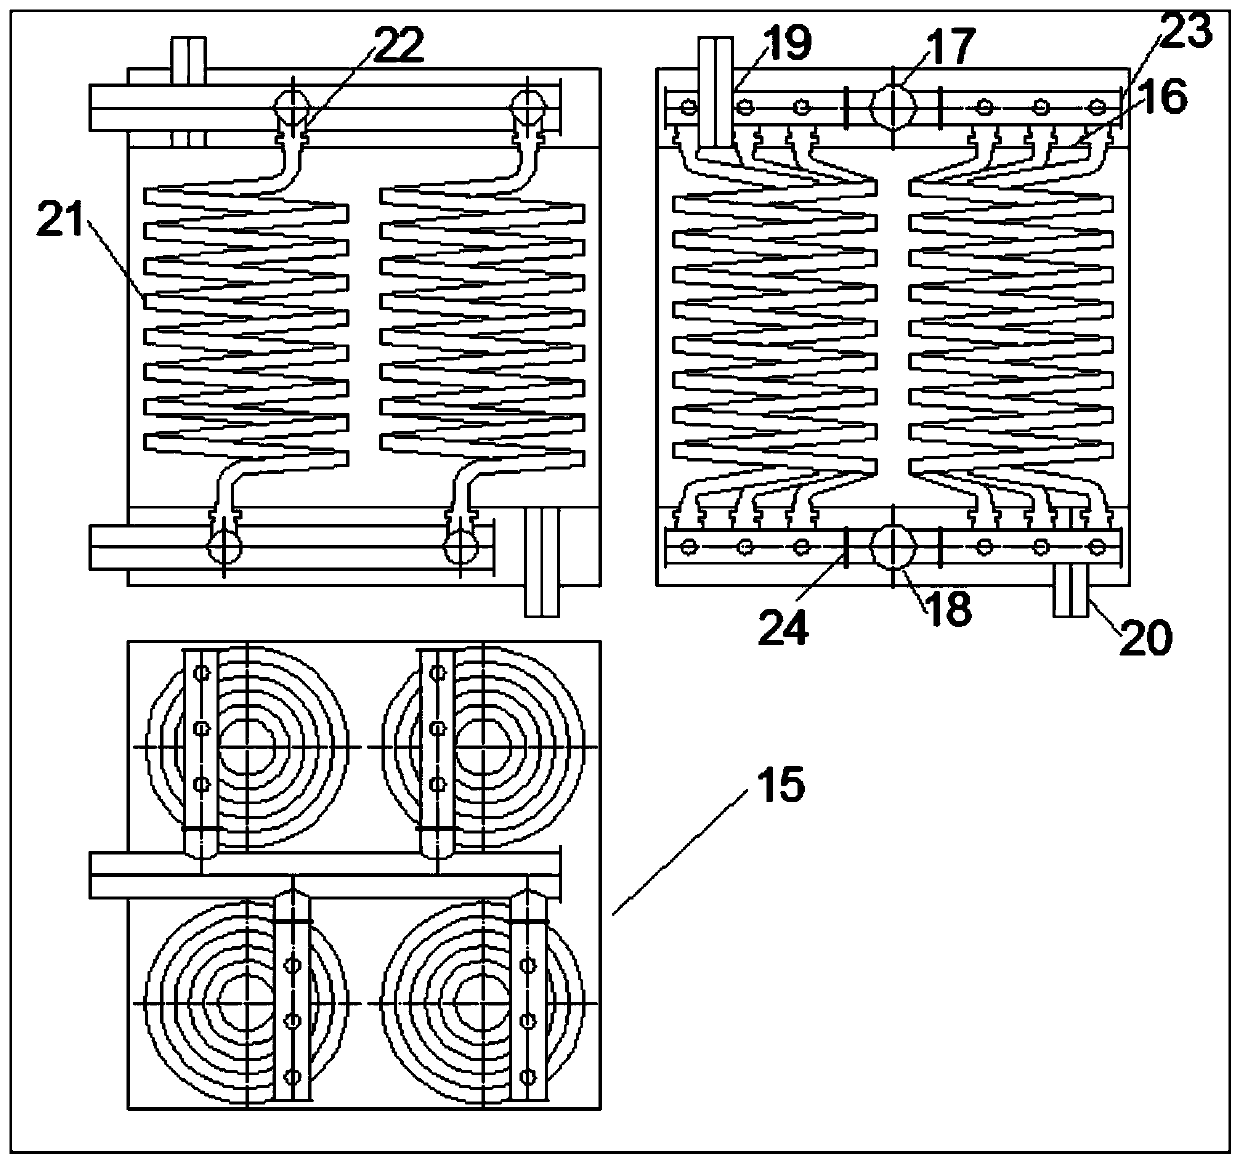 A pulsating heat exchanger and its deep well heat exchange system